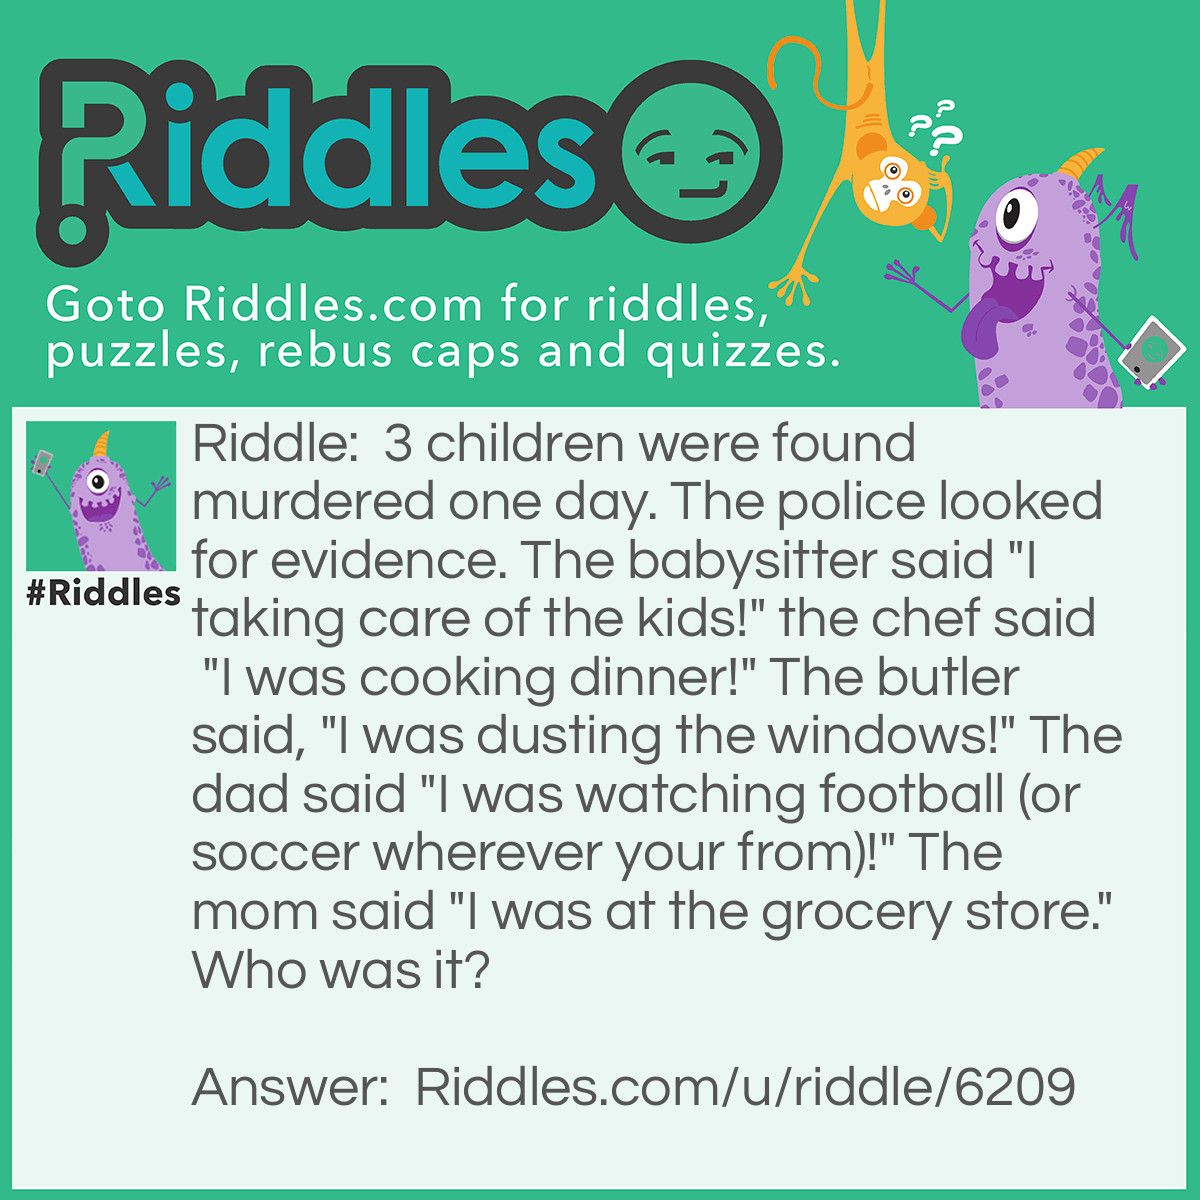 Riddle: 3 children were found murdered one day. The police looked for evidence. The babysitter said "I taking care of the kids!" the chef said "I was cooking dinner!" The butler said, "I was dusting the windows!" The dad said "I was watching football (or soccer wherever your from)!" The mom said "I was at the grocery store." Who was it? Answer: The babysitter. 1. She was the only one with the kids when it happened, and 2 she says she was TAKING CARE OF THE KIDS as in killing.